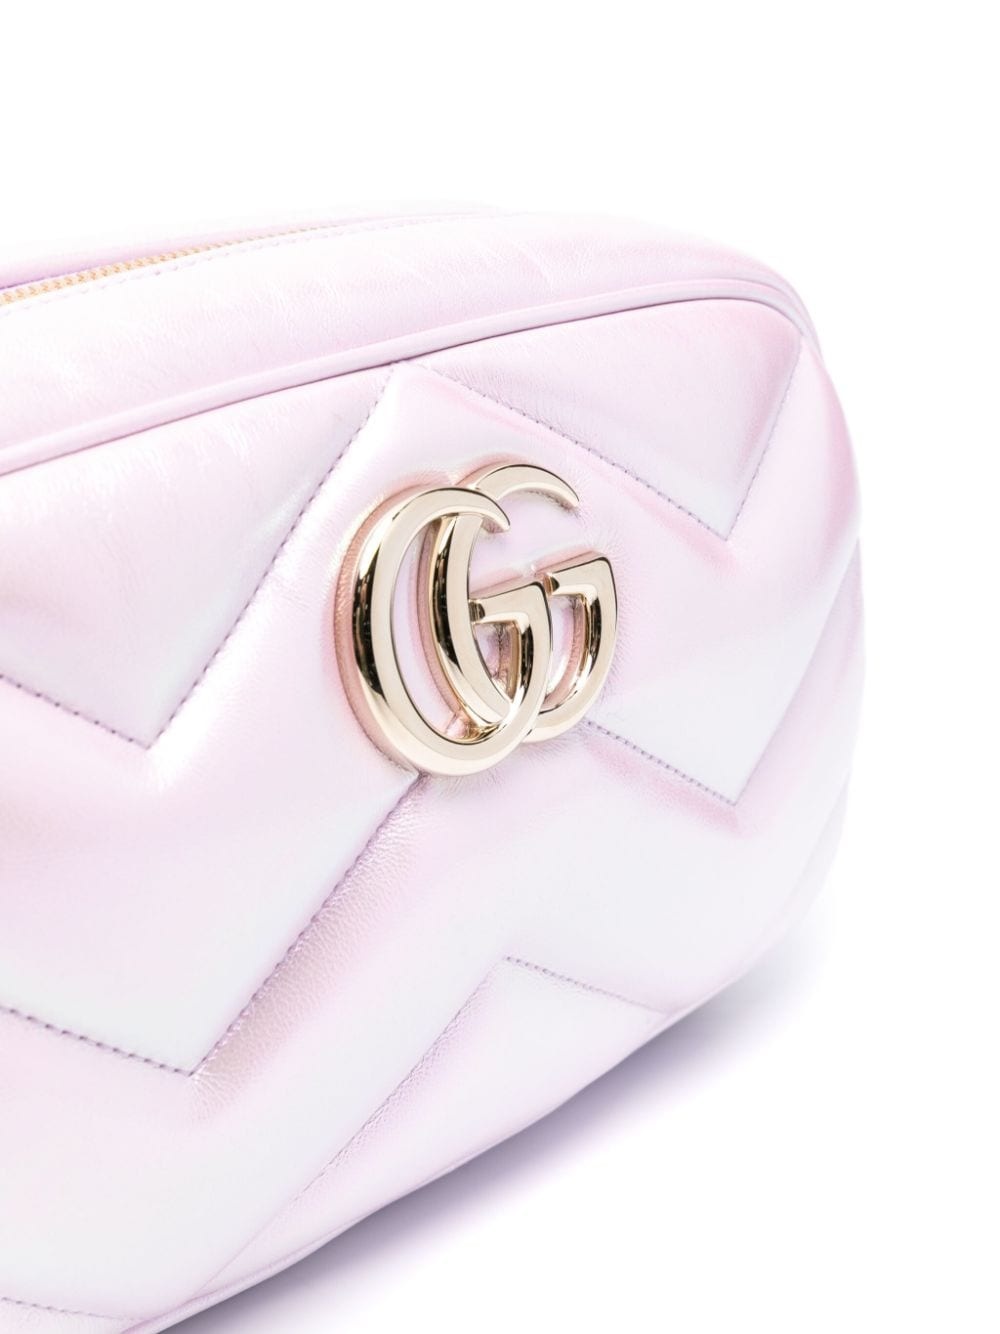 Gg marmont small leather shoulder bag - 2